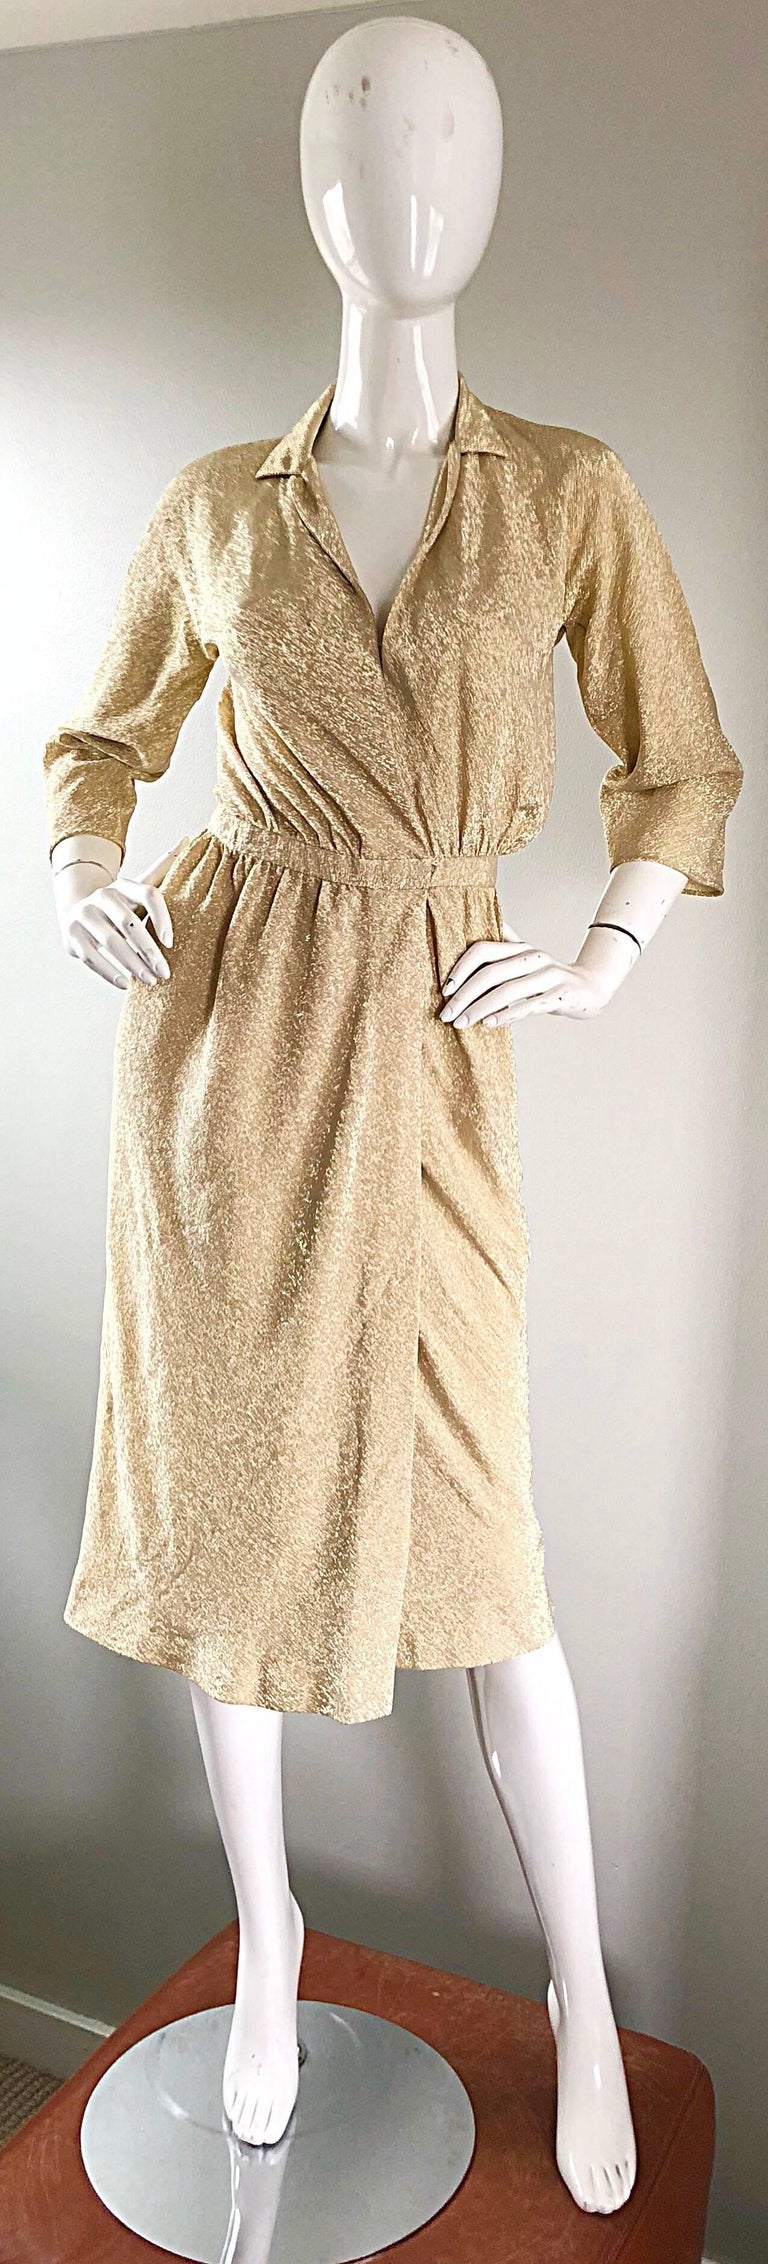 Sexy and iconic 70s HALSTON gold metallic silk lurex wrap shirt dress! Features a stunning silhouette, with a plunging neckline in a flattering wrap style. Studio 54 at its' finest! Couture detail, with heavy attention to detail. Roy Halston was